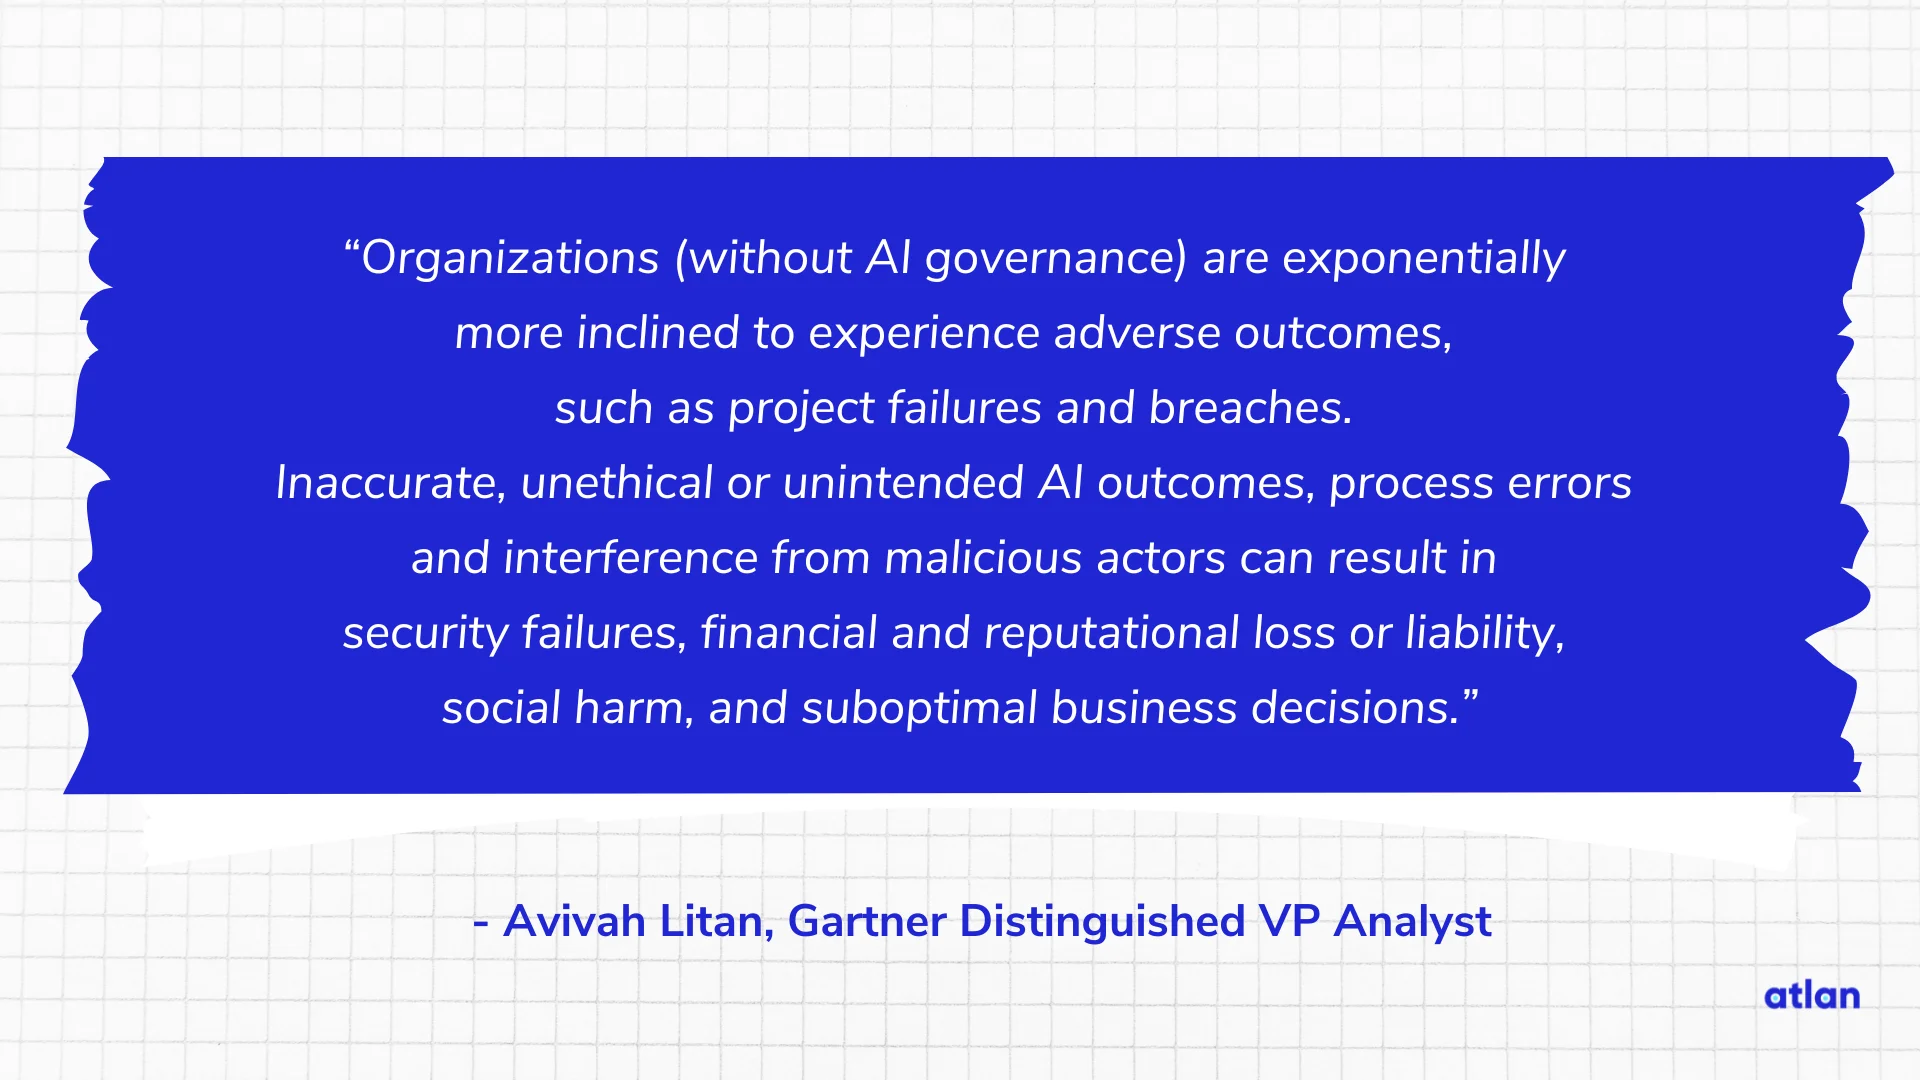 Organizations (without AI governance) are exponentially more inclined to experience adverse outcomes